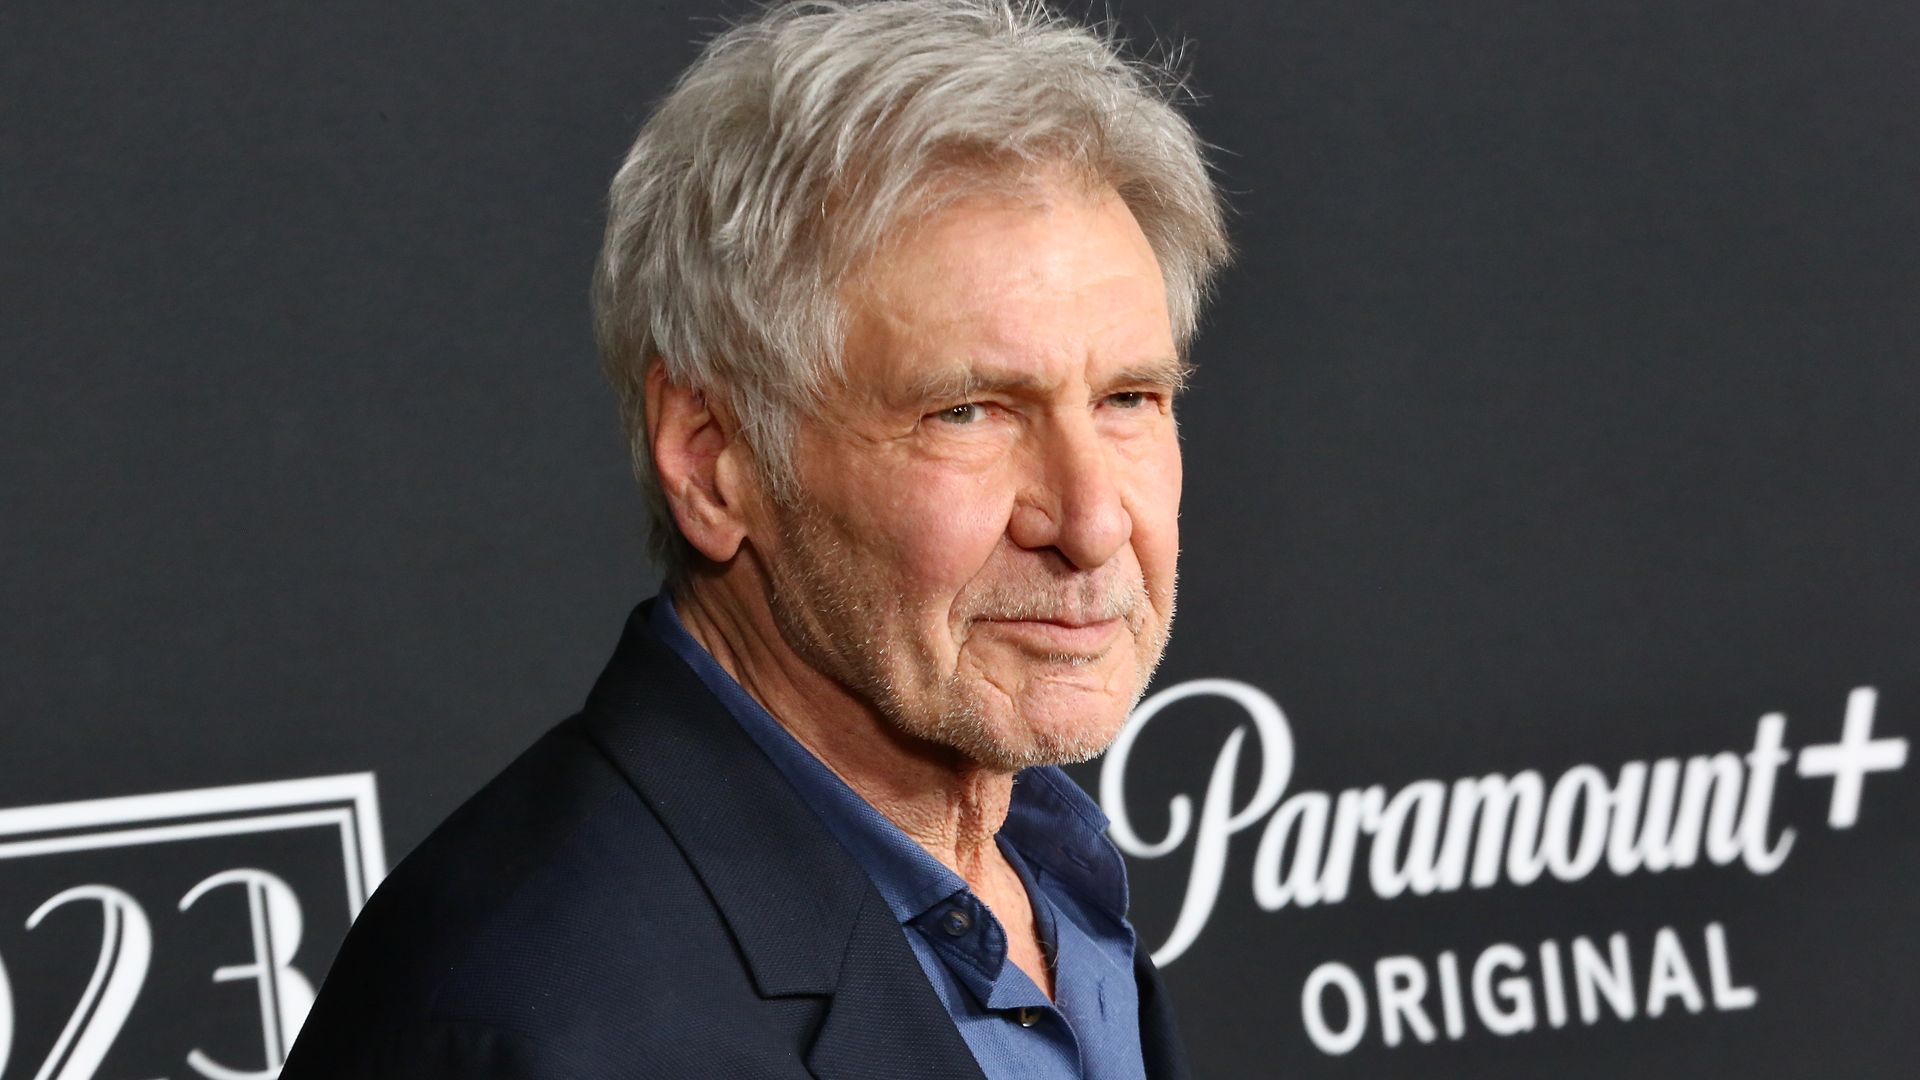 Harrison Ford attends the Los Angeles Premiere Of Paramount+'s "1923" at Hollywood American Legion on December 02, 2022 in Los Angeles, California